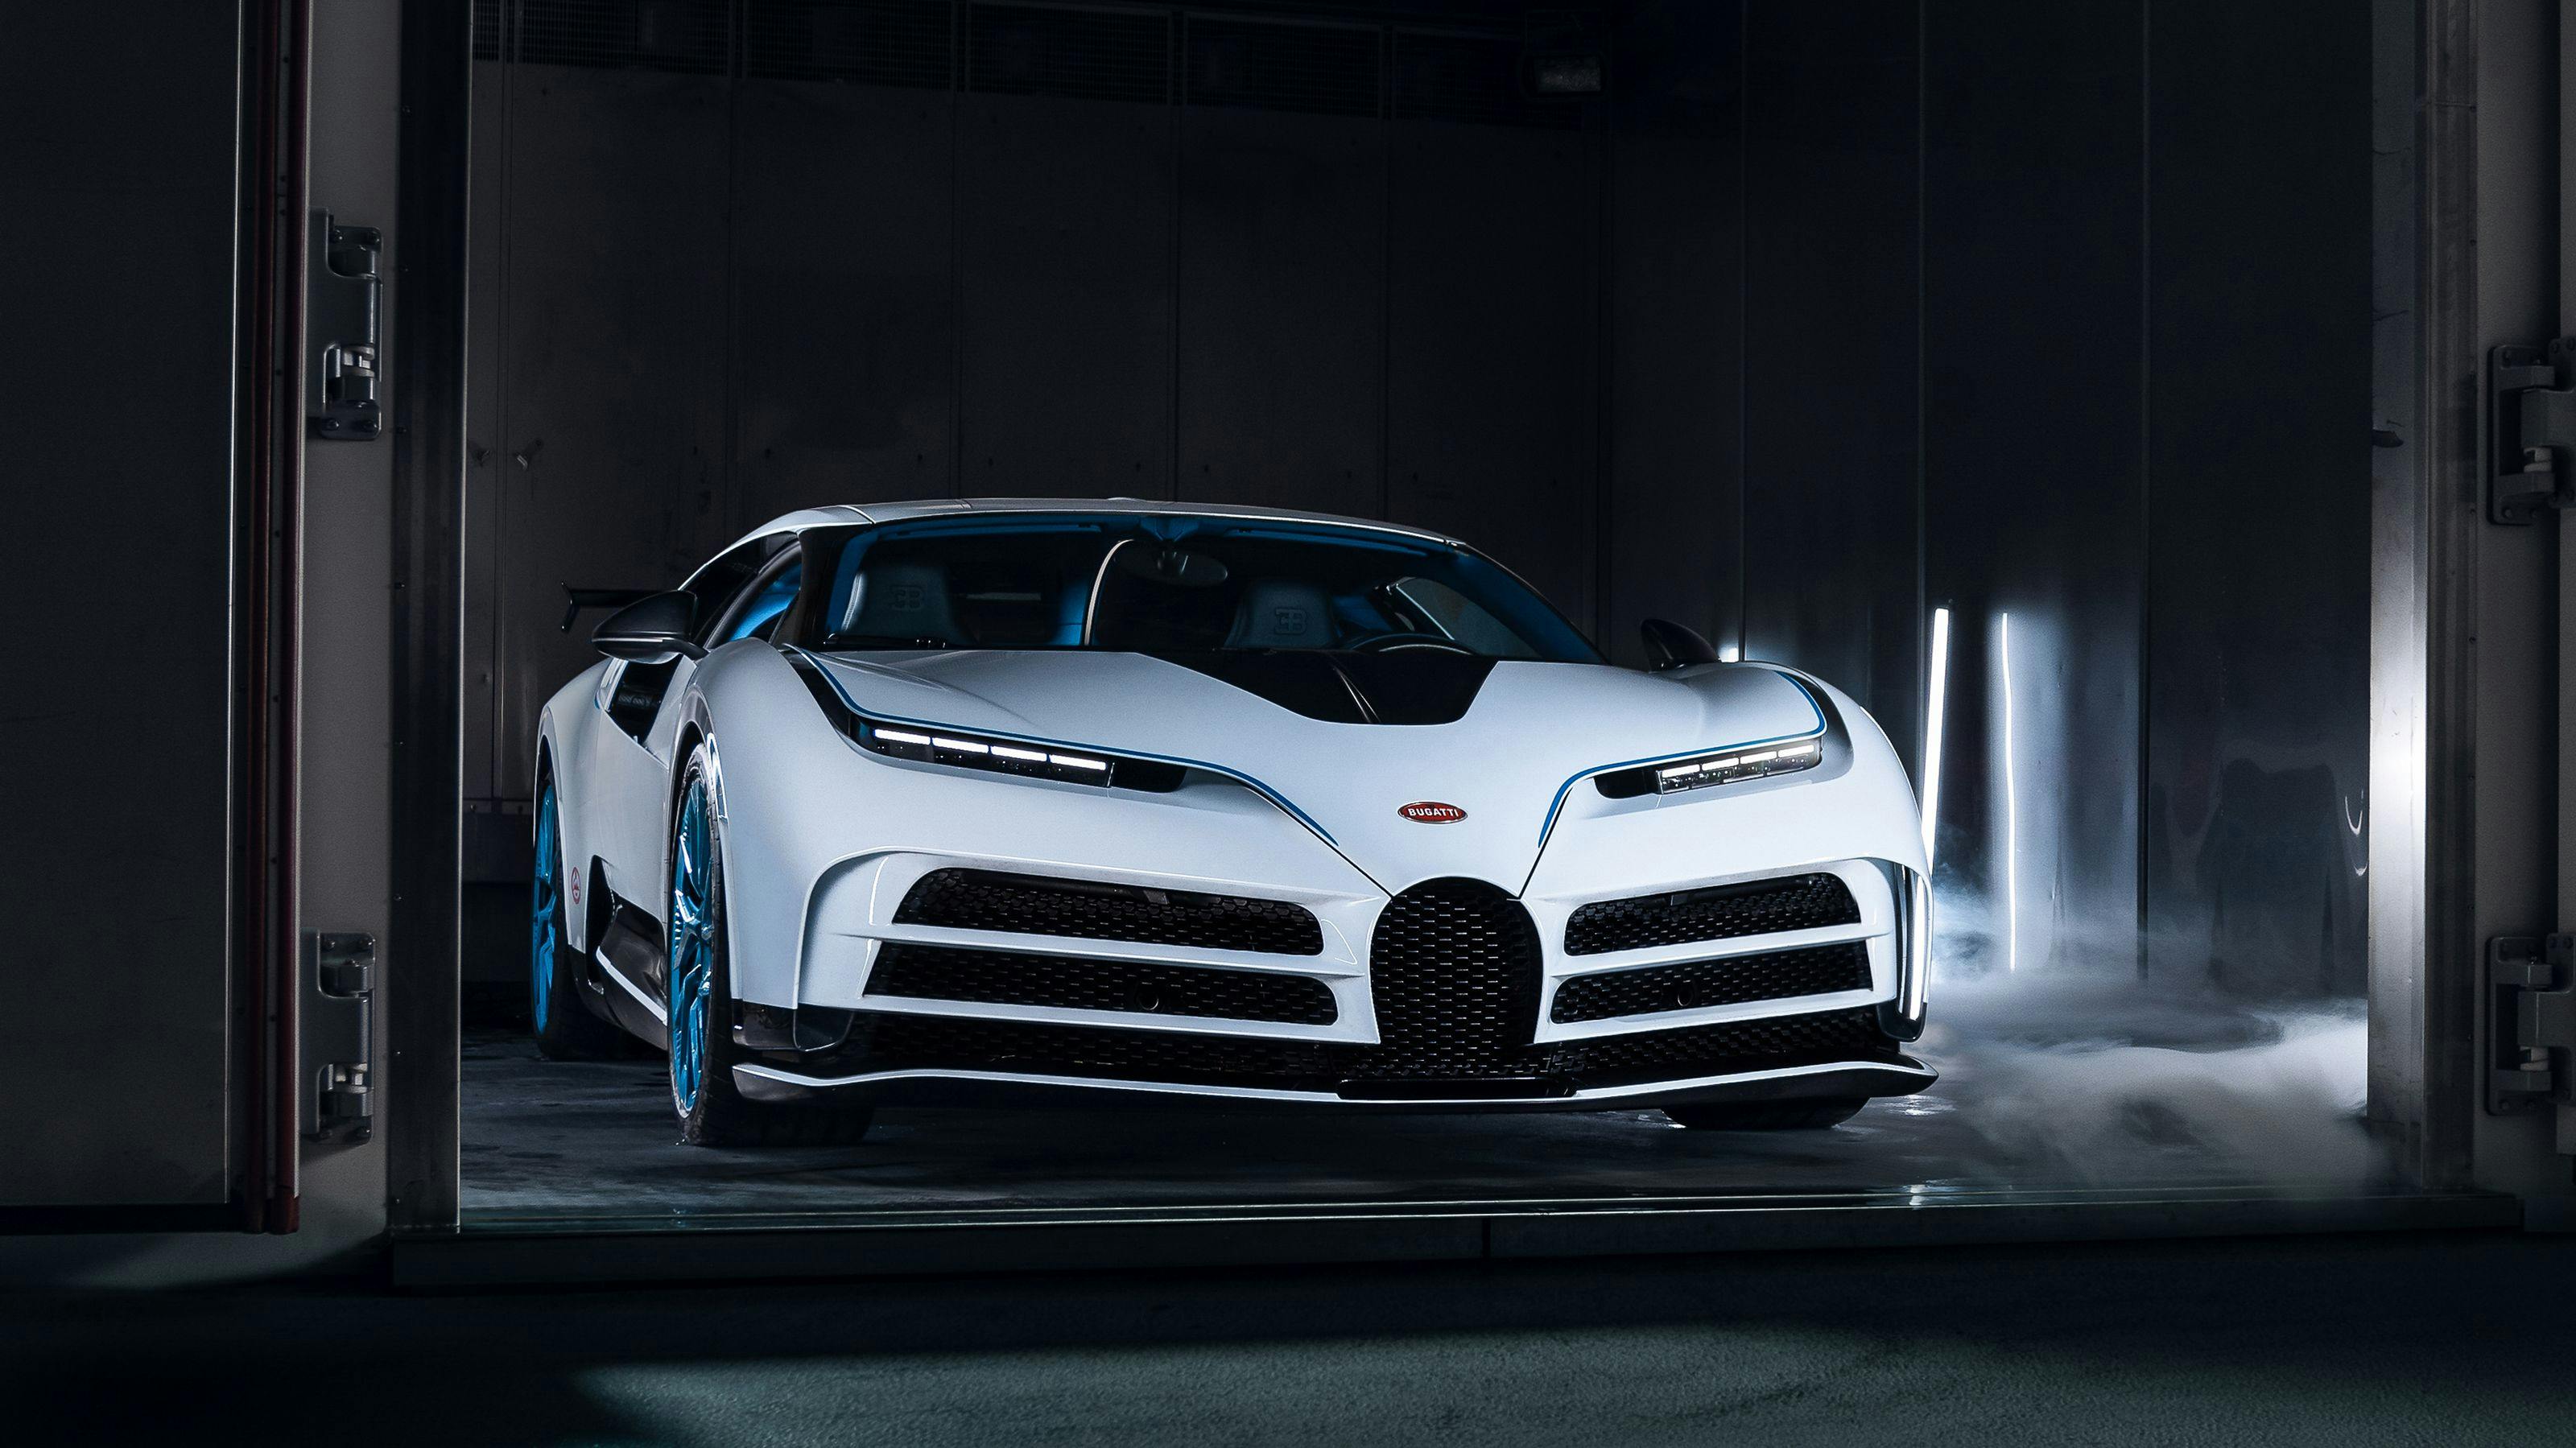 Bugatti Centodieci – Tested to Minus 20 Degrees Celsius in the Climate Chamber